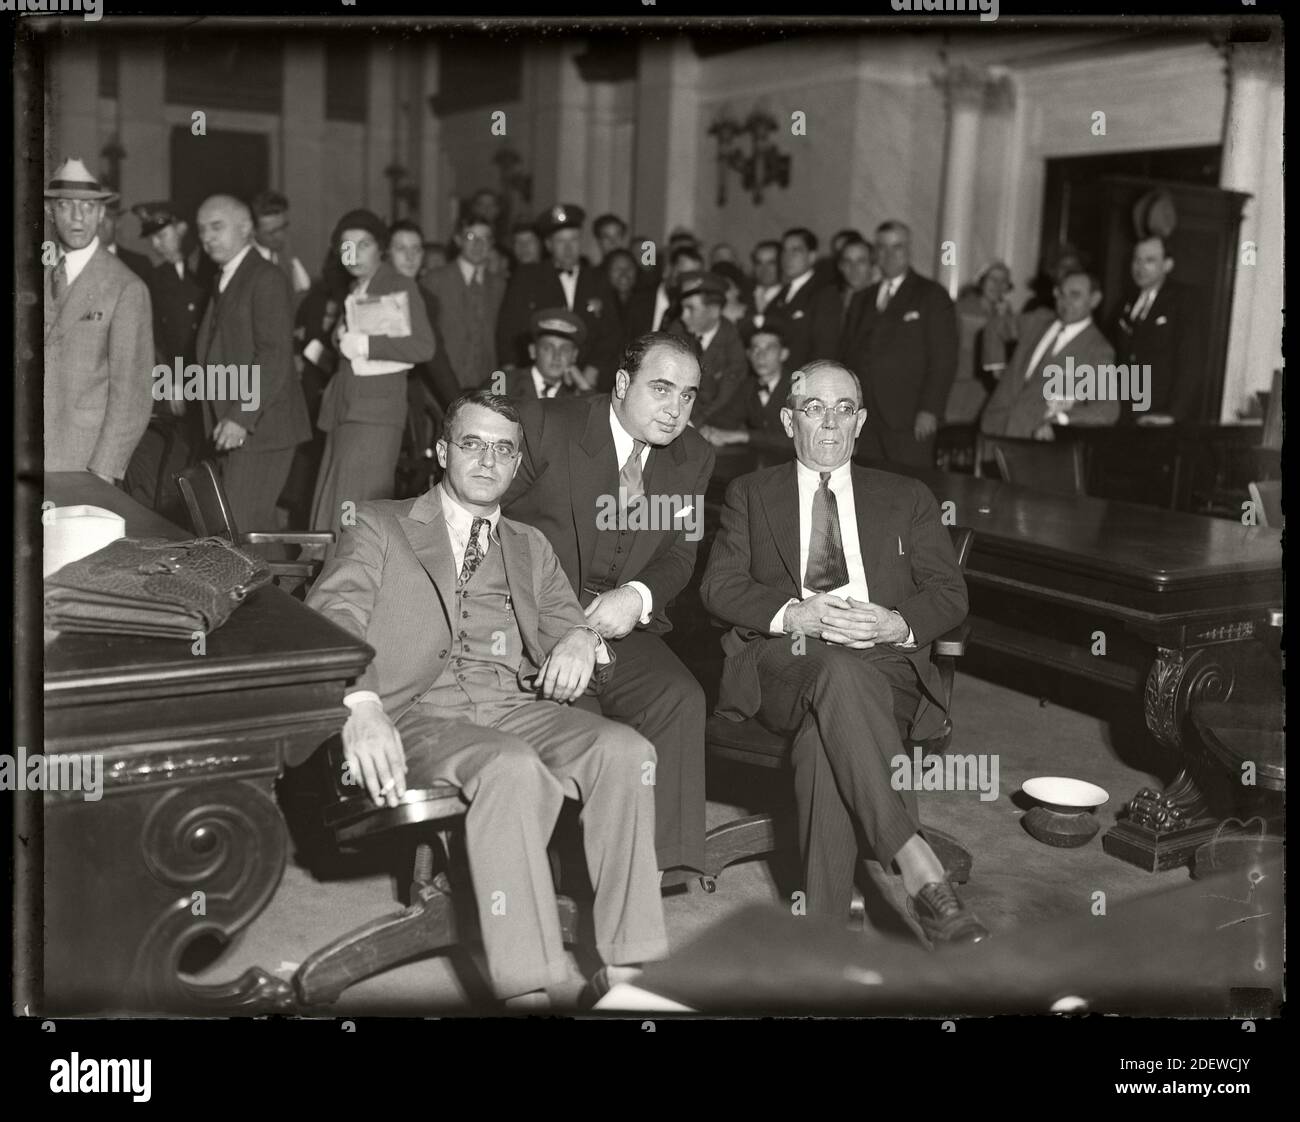 Al Capone sits in federal court during his tax evasion trial with his  attorneys Michael Ahern, left, and Albert Fink, right. Chicago, Illinois,  October 7, 1931. Image from 4x5 inch glass negative